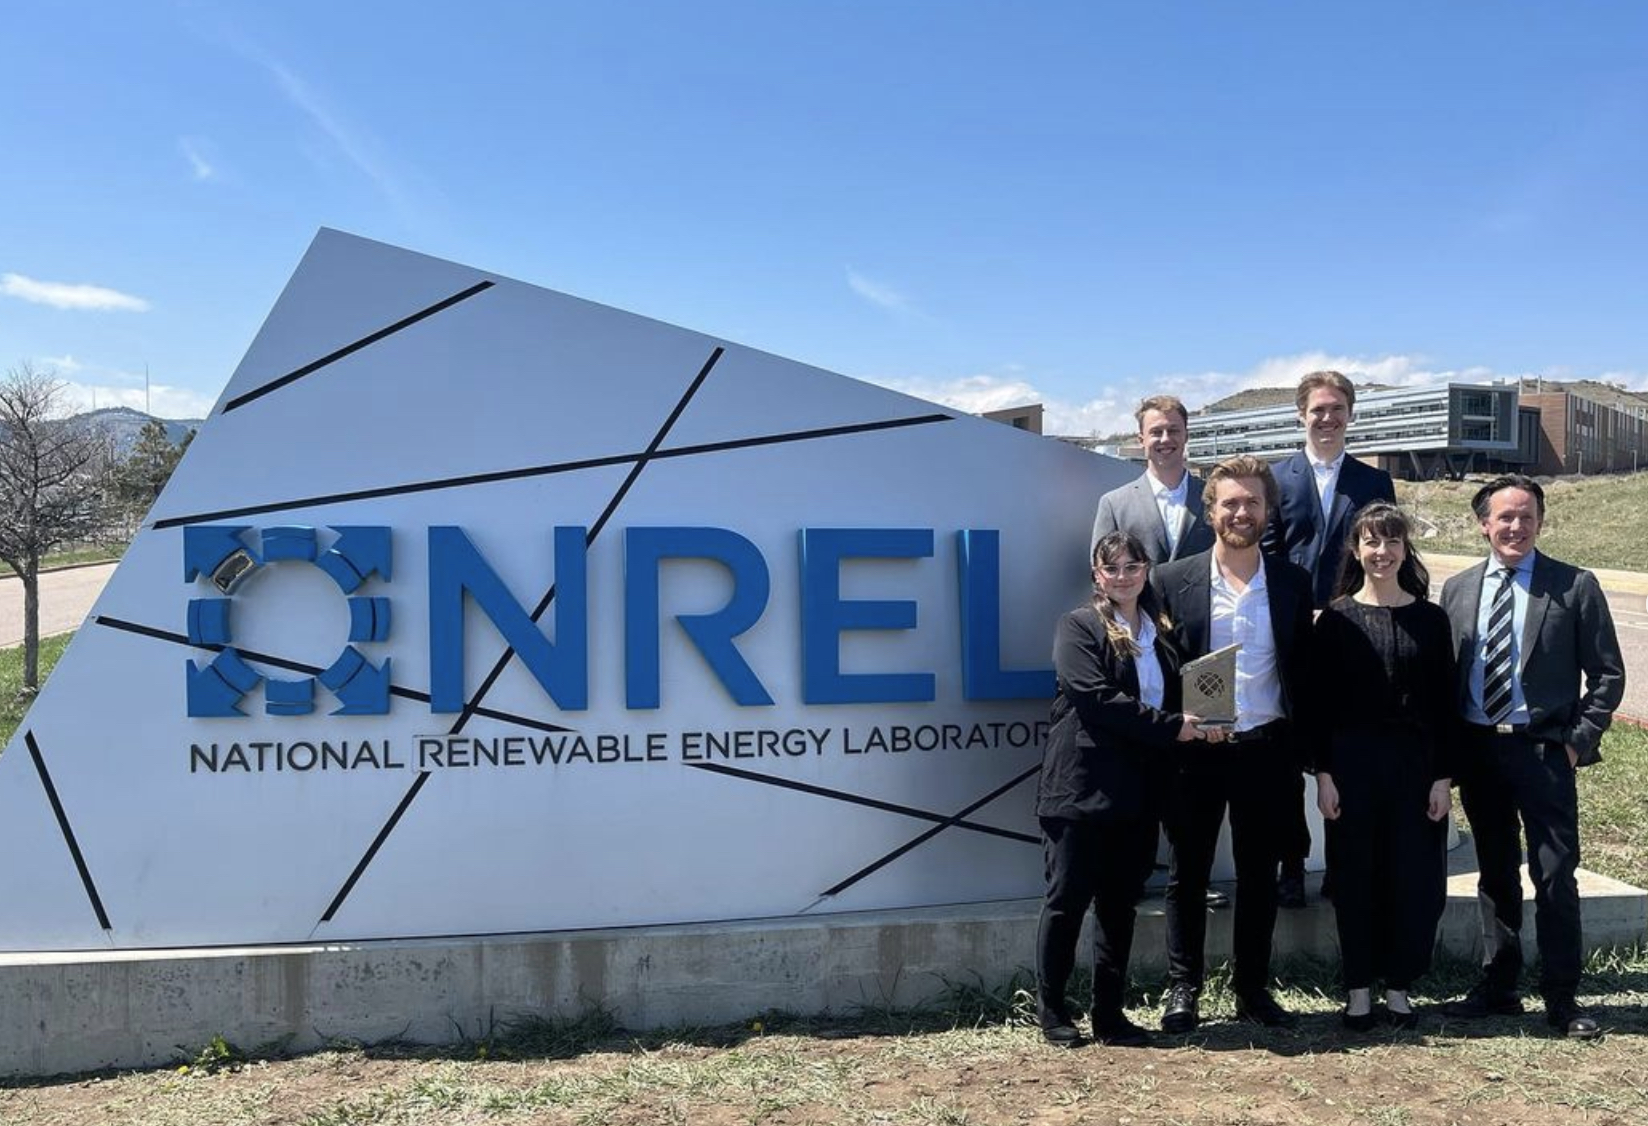 The modular team poses with their award in from of the national renewable energy laboratory sign in Golden, CO.